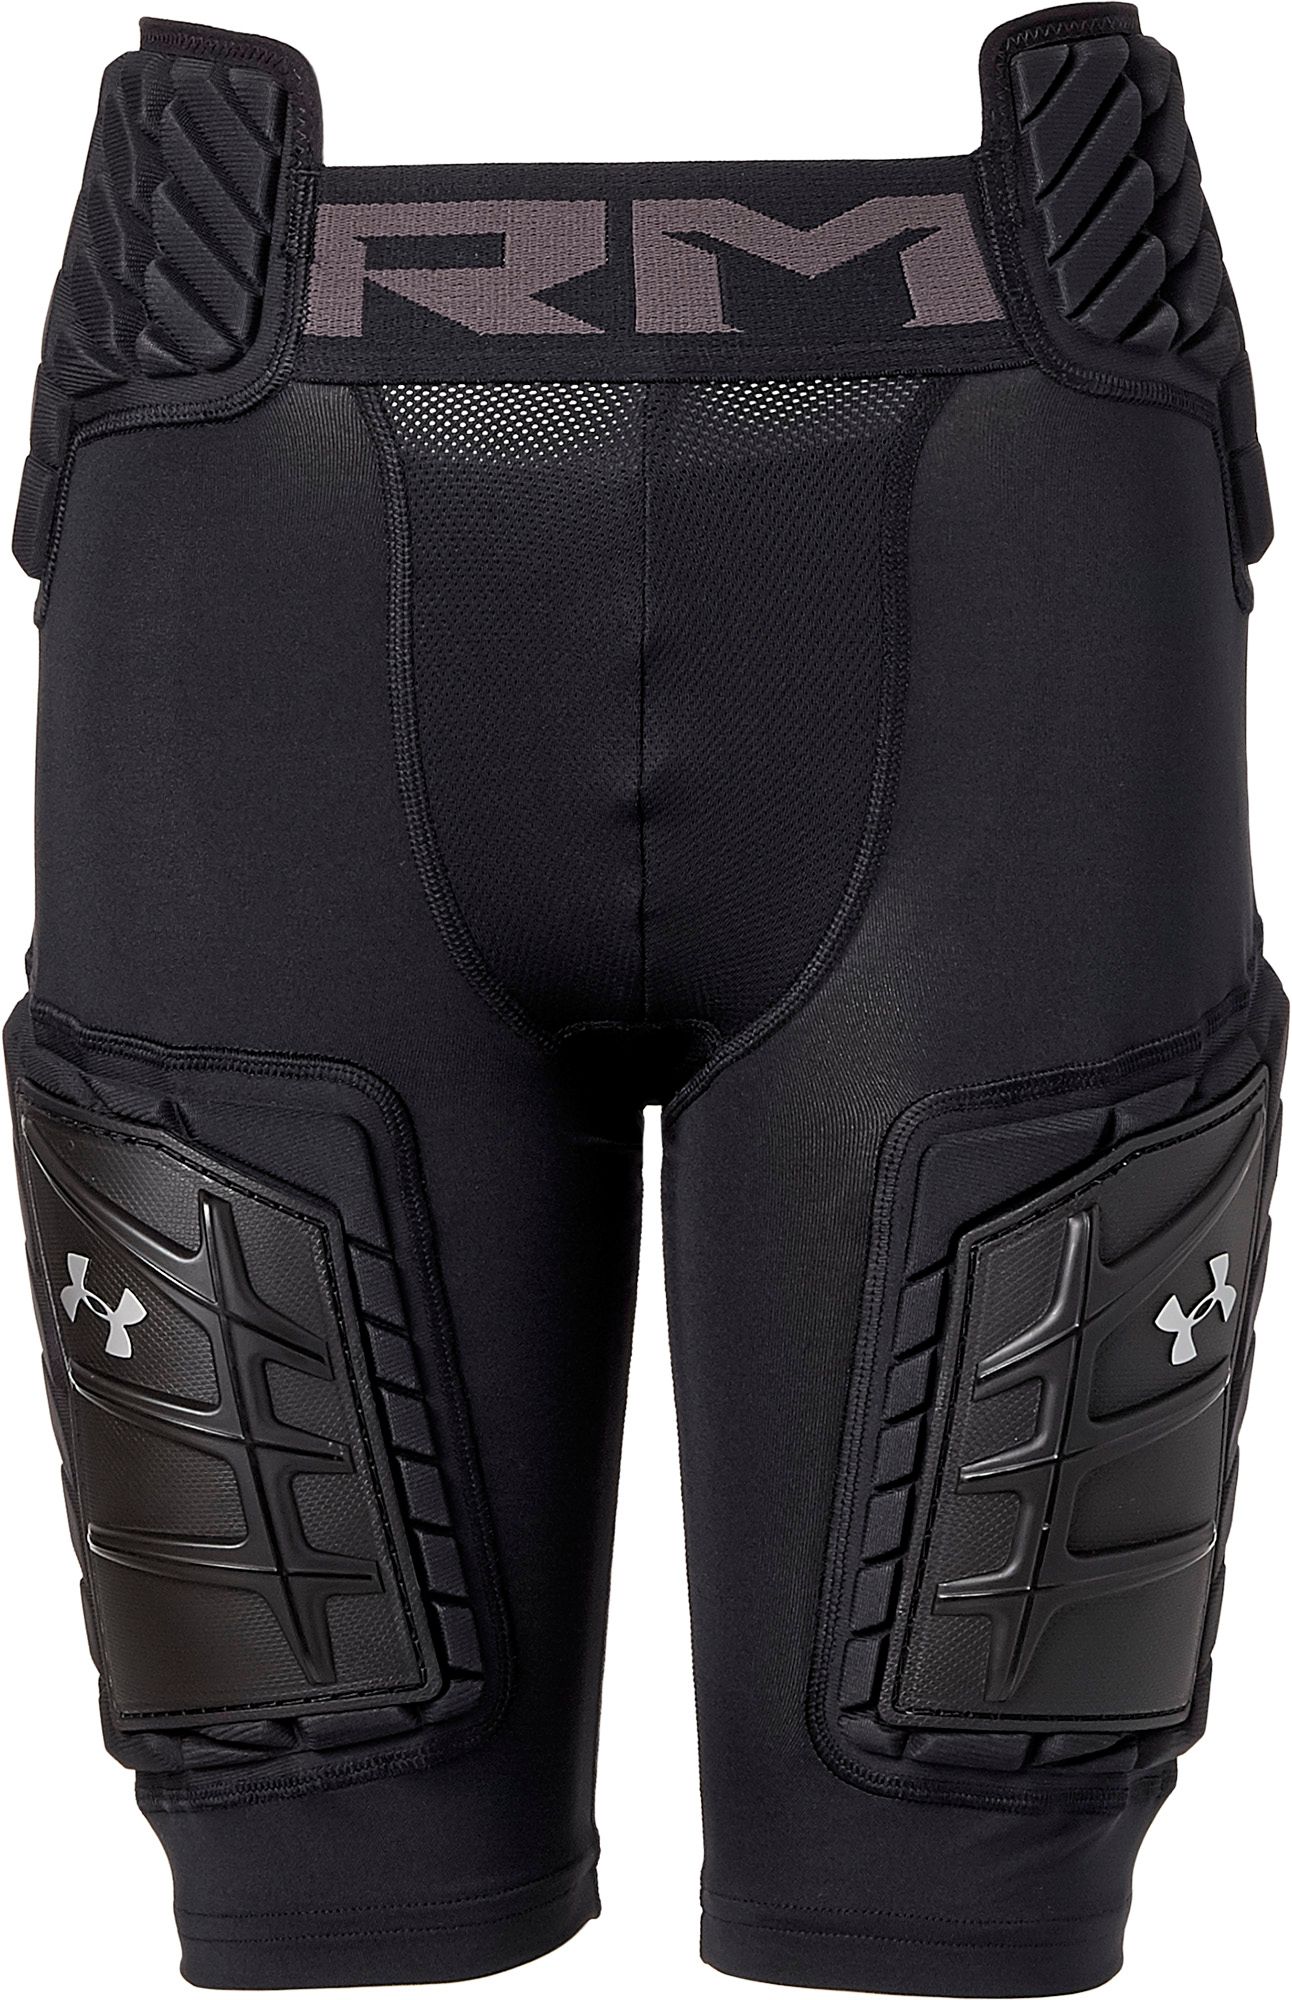 under armour football gear for youth